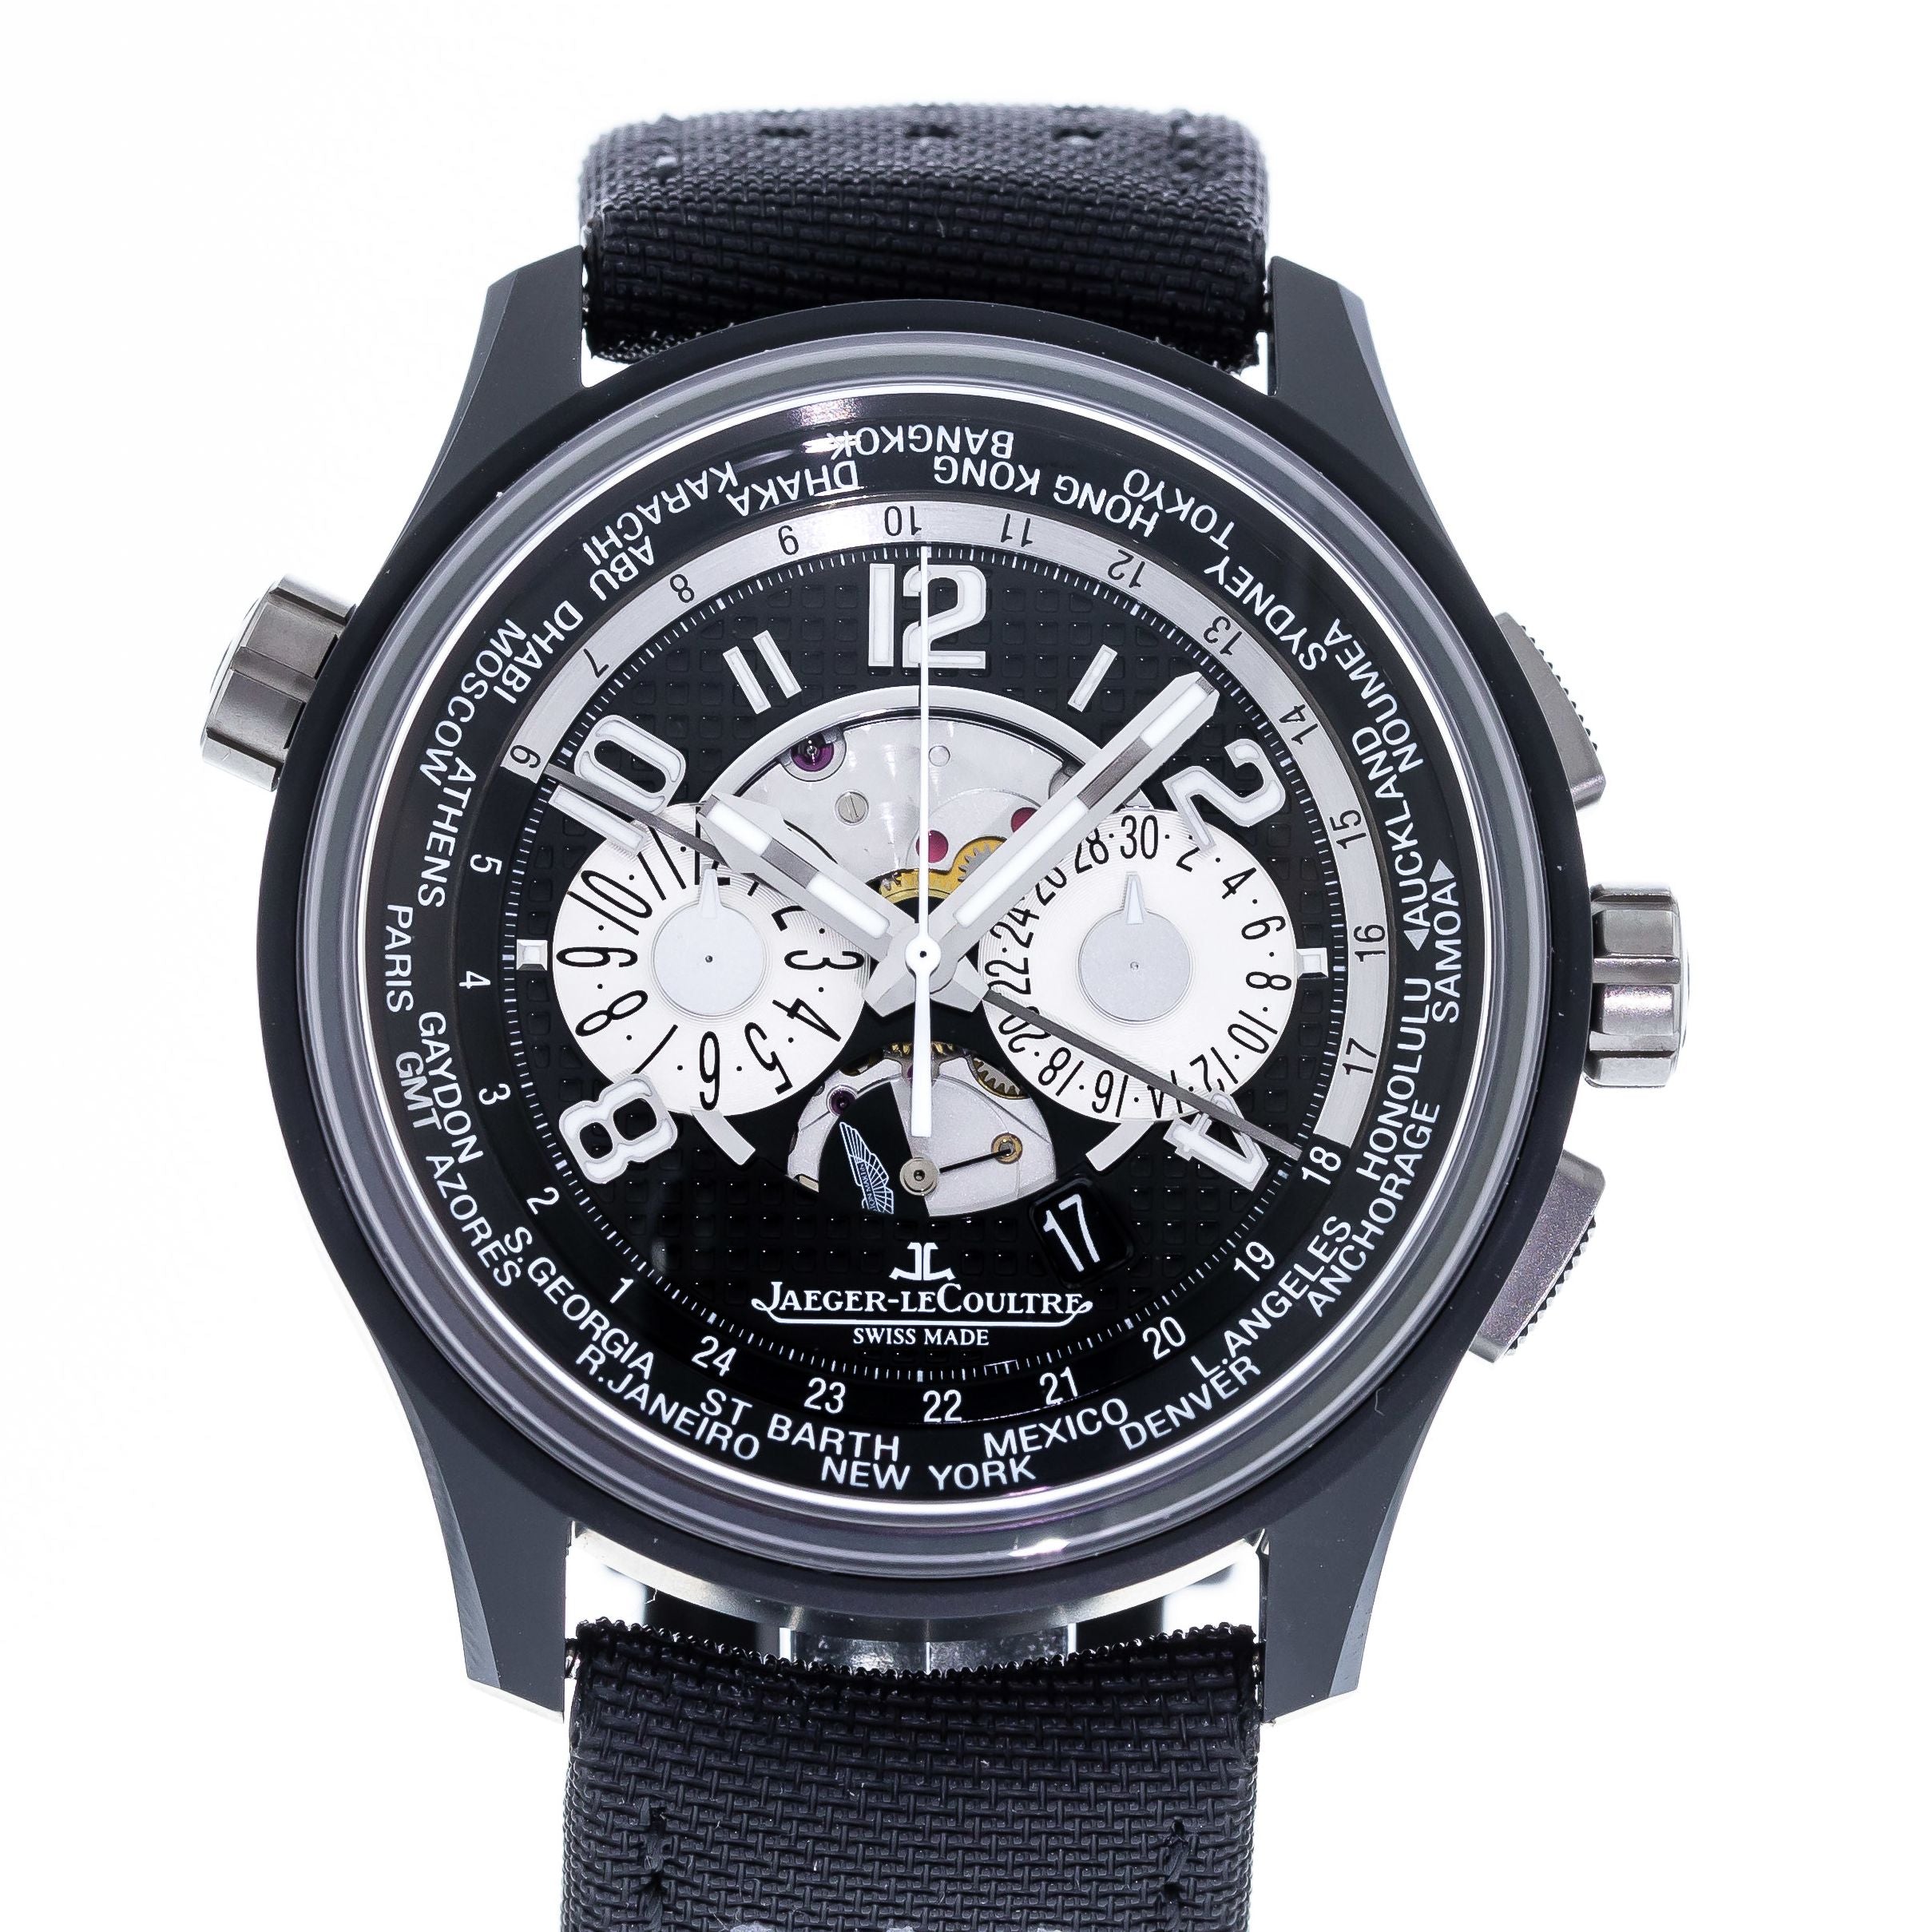 Jaeger-LeCoultre Amvox 5 44 mm Watch in Black Dial